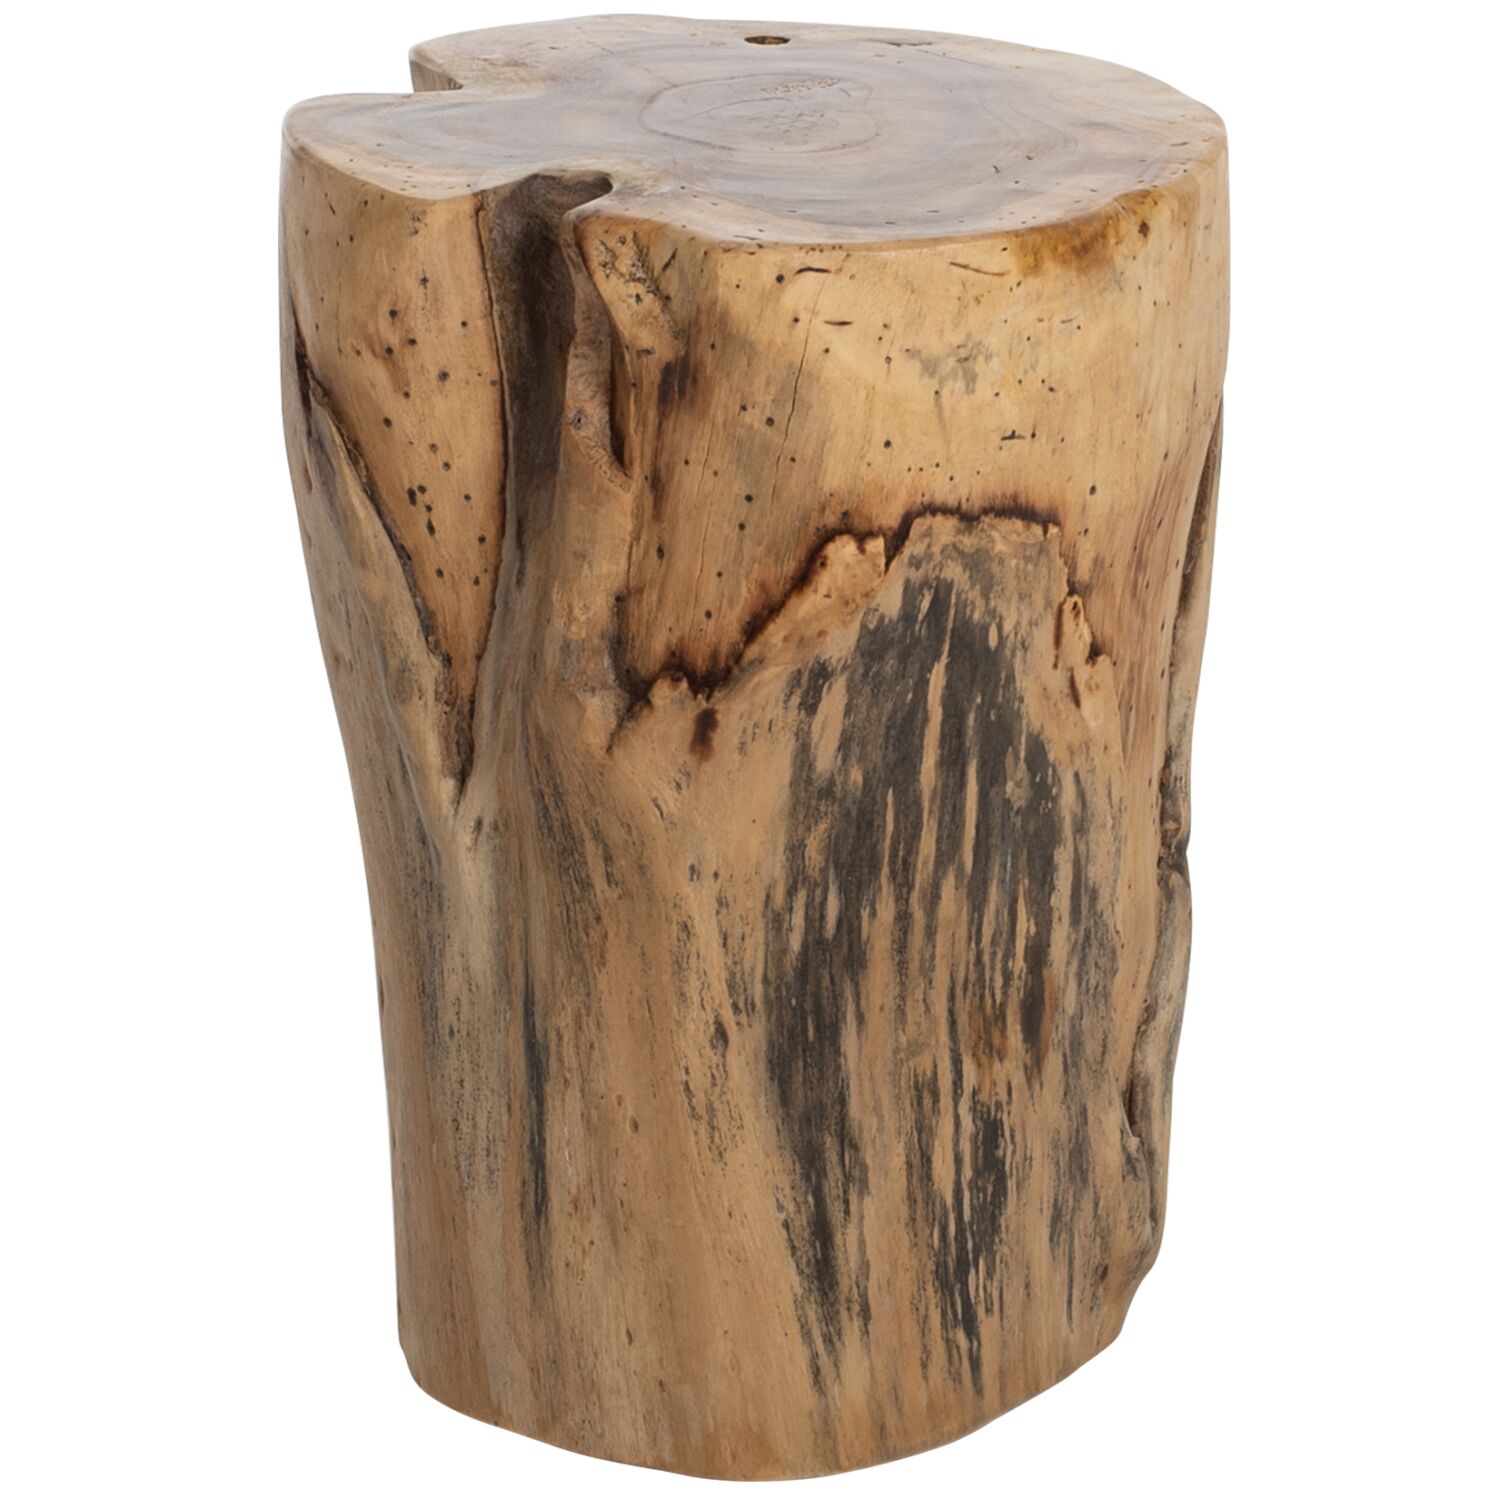 STUMP SIDE TABLE FB99374 SOLID TEAK TRUNK NATURAL Φ30-35X45